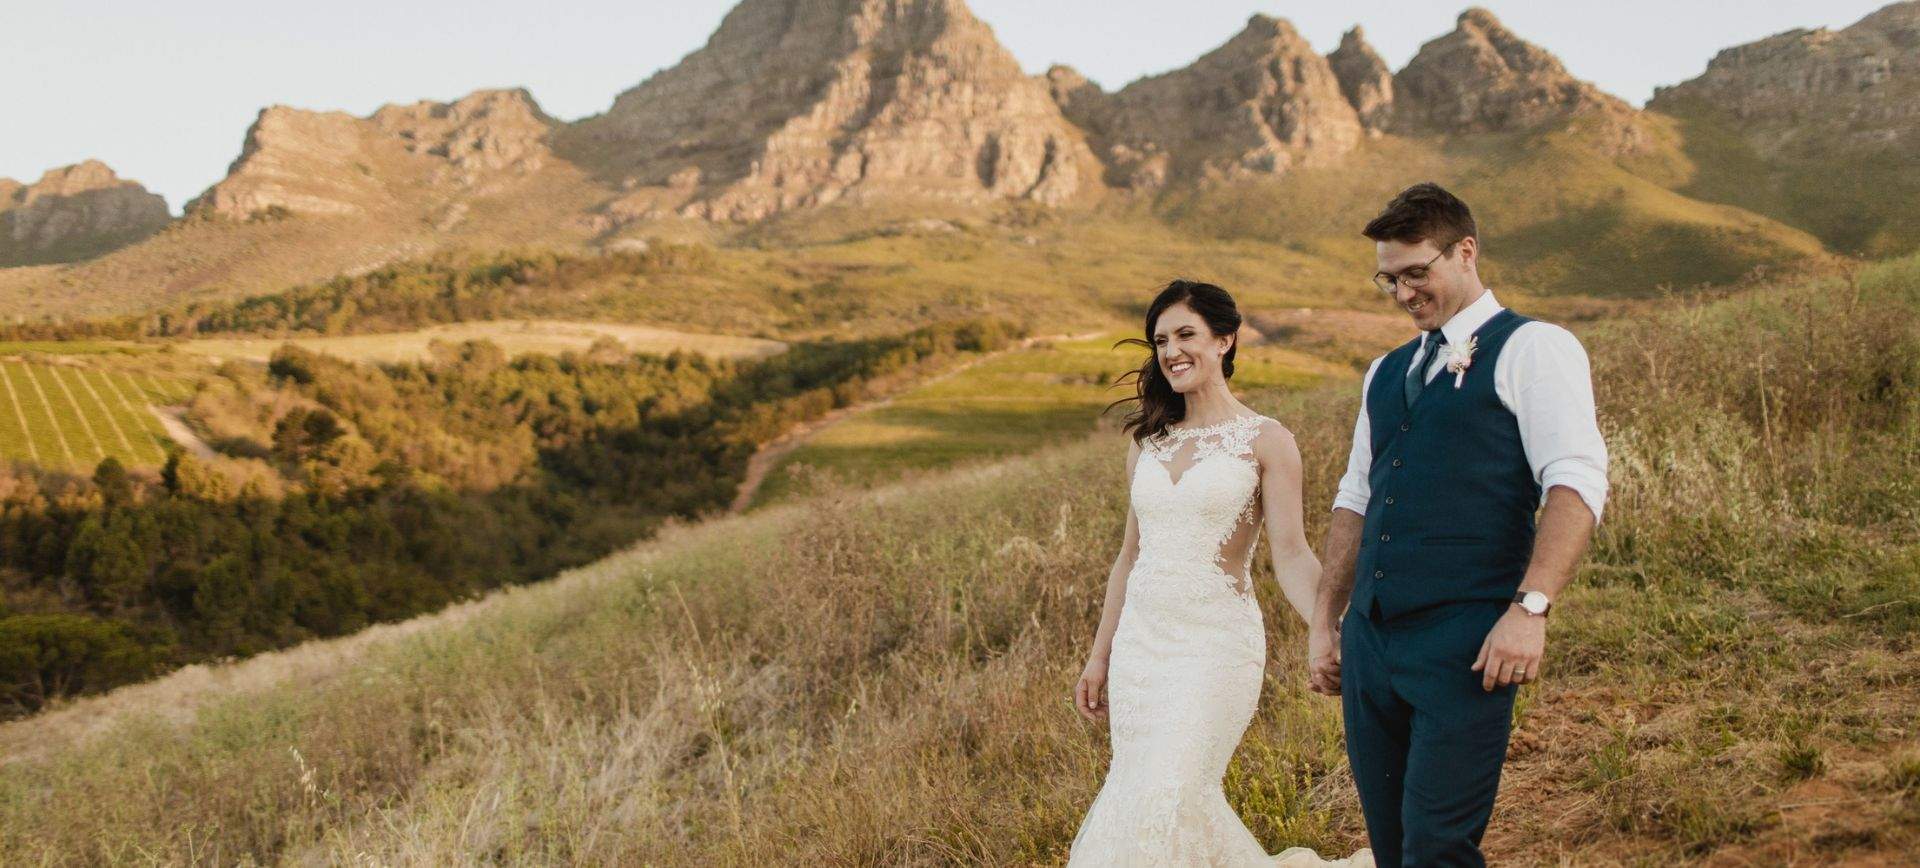 cape town elopement package - south africa